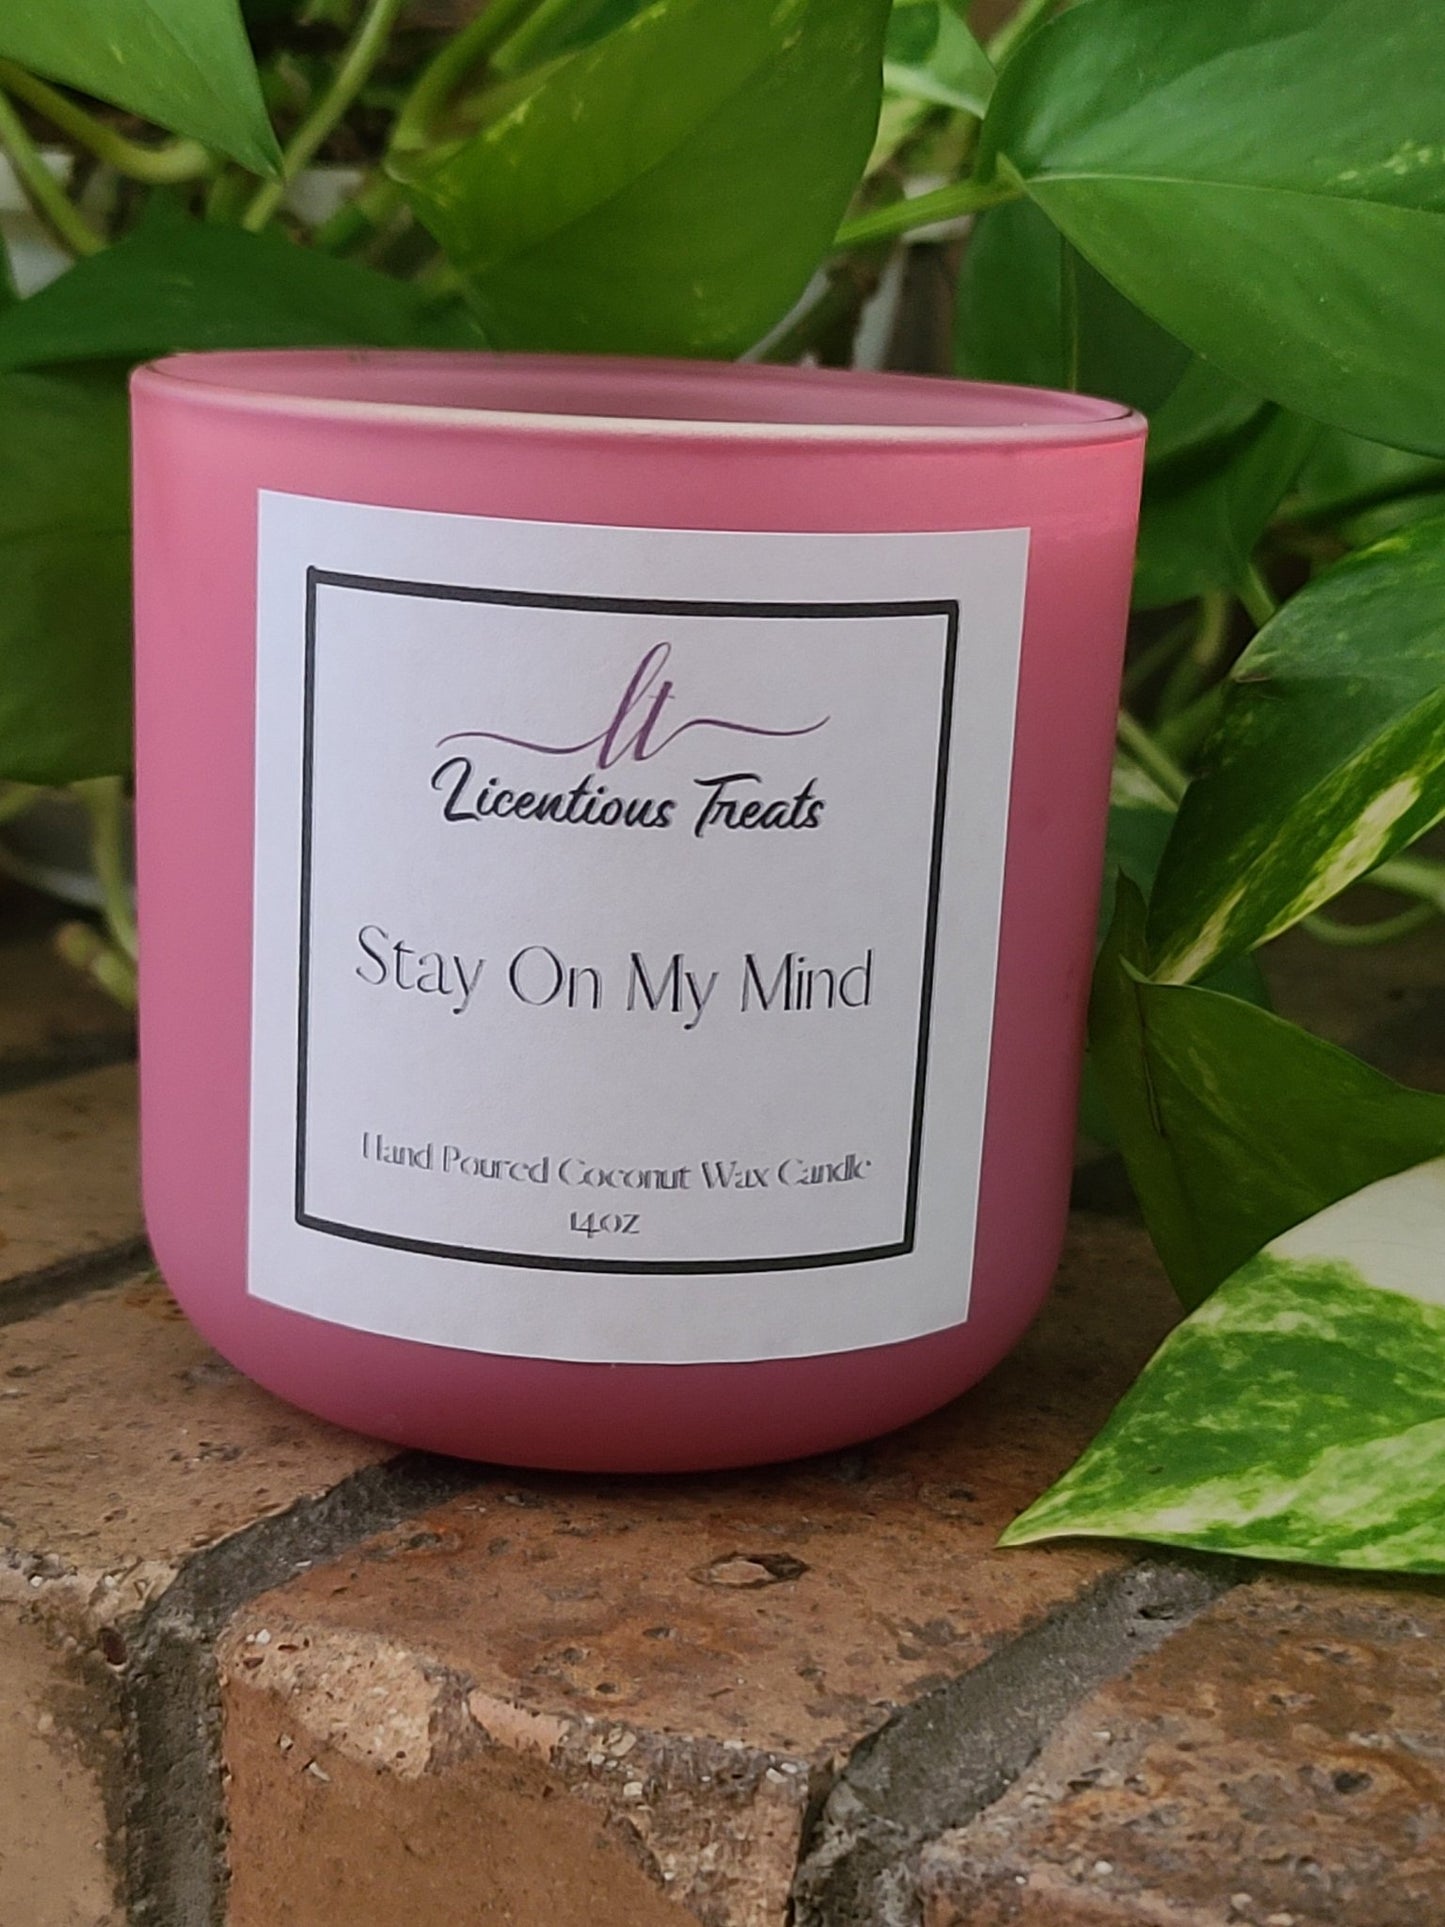 Candles - Stay On My Mind 14oz - Licentious TreatsCandles - Stay On My Mind 14oz